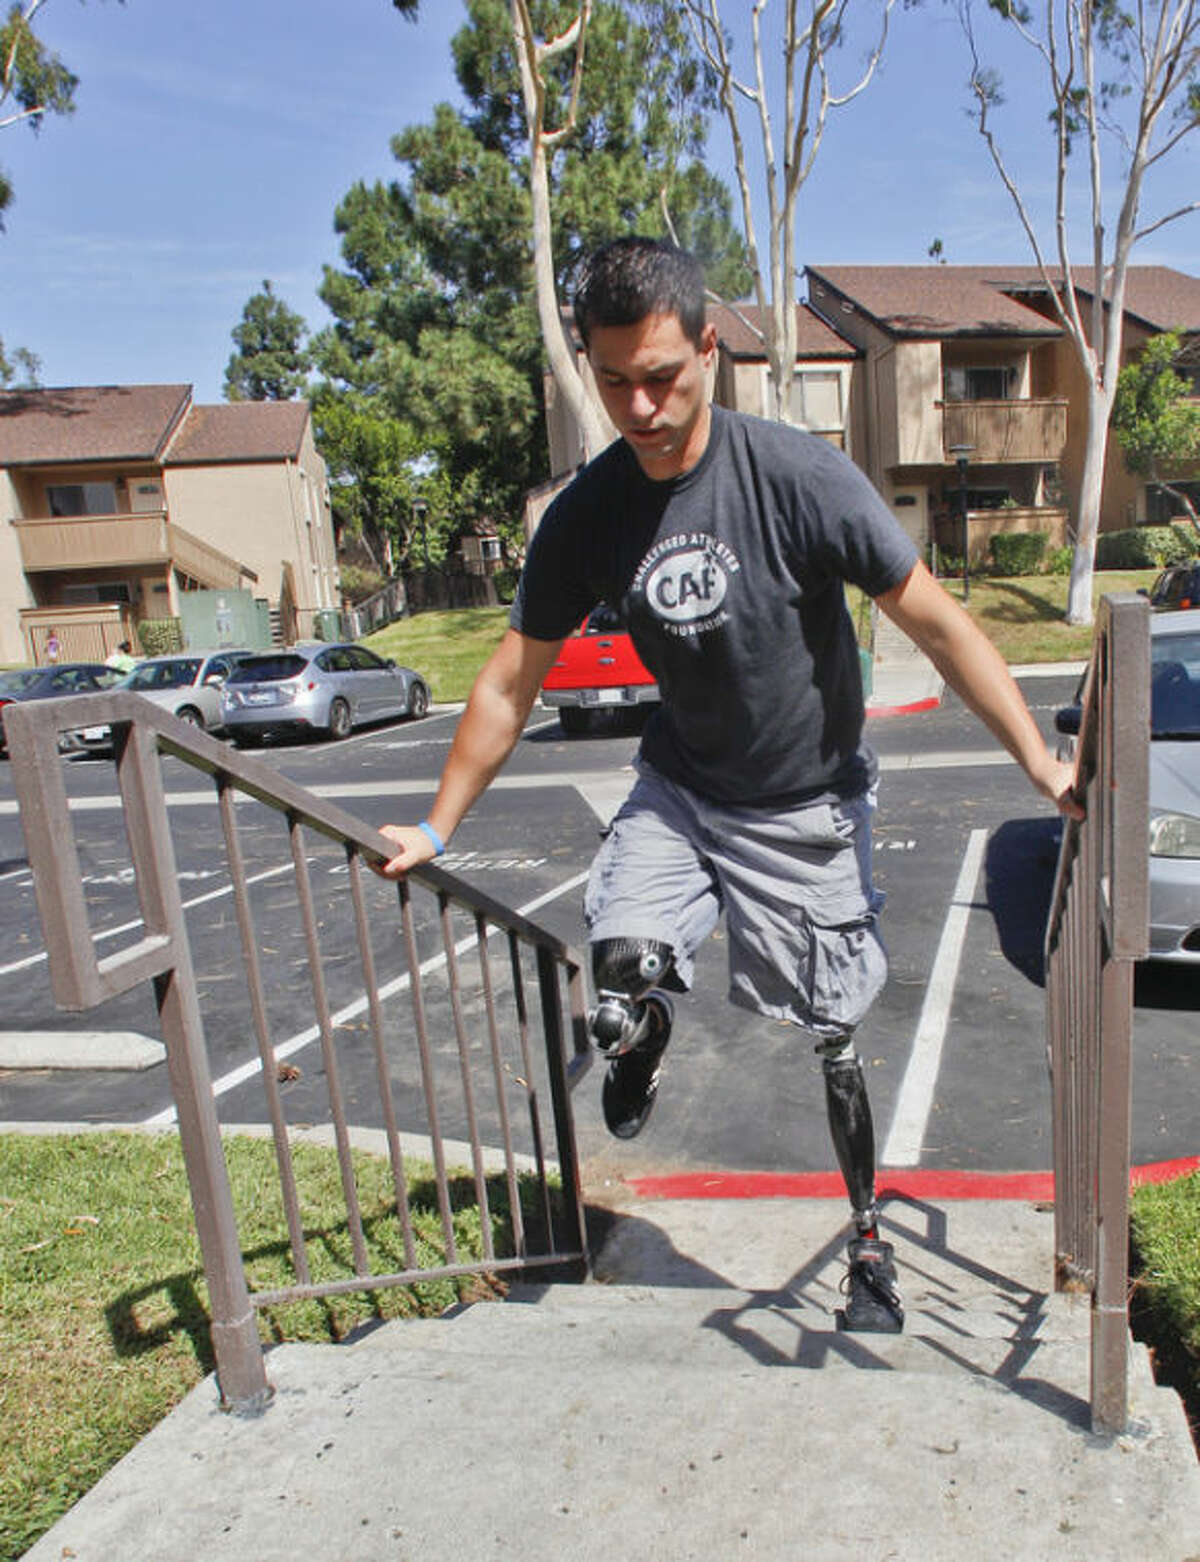 FILE - In this Thursday, Oct. 4, 2012 file photo, U.S. Marine Cpl. Daniel Riley, 21, navigates the steps outside his apartment on his prosthetic legs in San Diego, Calif. Riley lost both legs to an IED in Afhganistan. Learning to walk on his prosthetic legs was "like kicking a soccer ball in a swimming pool." Nearly 2,000 American troops have lost a leg, arm, foot or hand in Iraq or Afghanistan, and their sacrifices have led to advances in the immediate and long-term care of survivors, as well in the quality of prosthetics that are now so good that surgeons often chose them over trying to save a badly mangled leg. (AP Photo/Lenny Ignelzi)